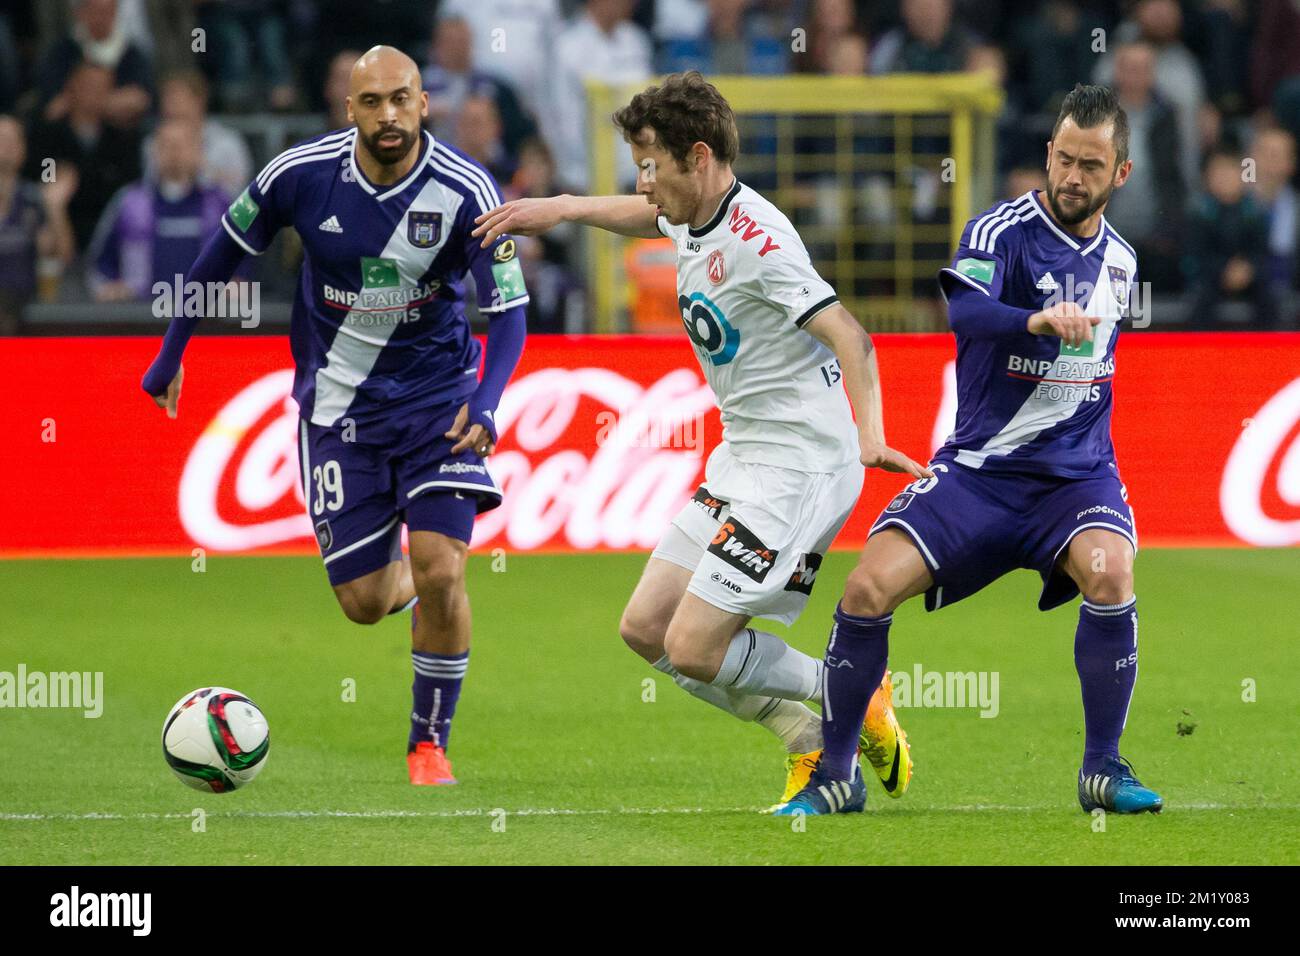 20150425 - CHARLEROI, BELGIUM: Anderlecht's Anthony Vanden Borre and Kortrijk's Thomas Matton fight for the ball during the Jupiler Pro League match between RSC Anderlecht and KV Kortrijk, Saturday 25 April 2015 in Brussels, on the fourth day of the Play-off 1. BELGA PHOTO KURT DESPLENTER Stock Photo